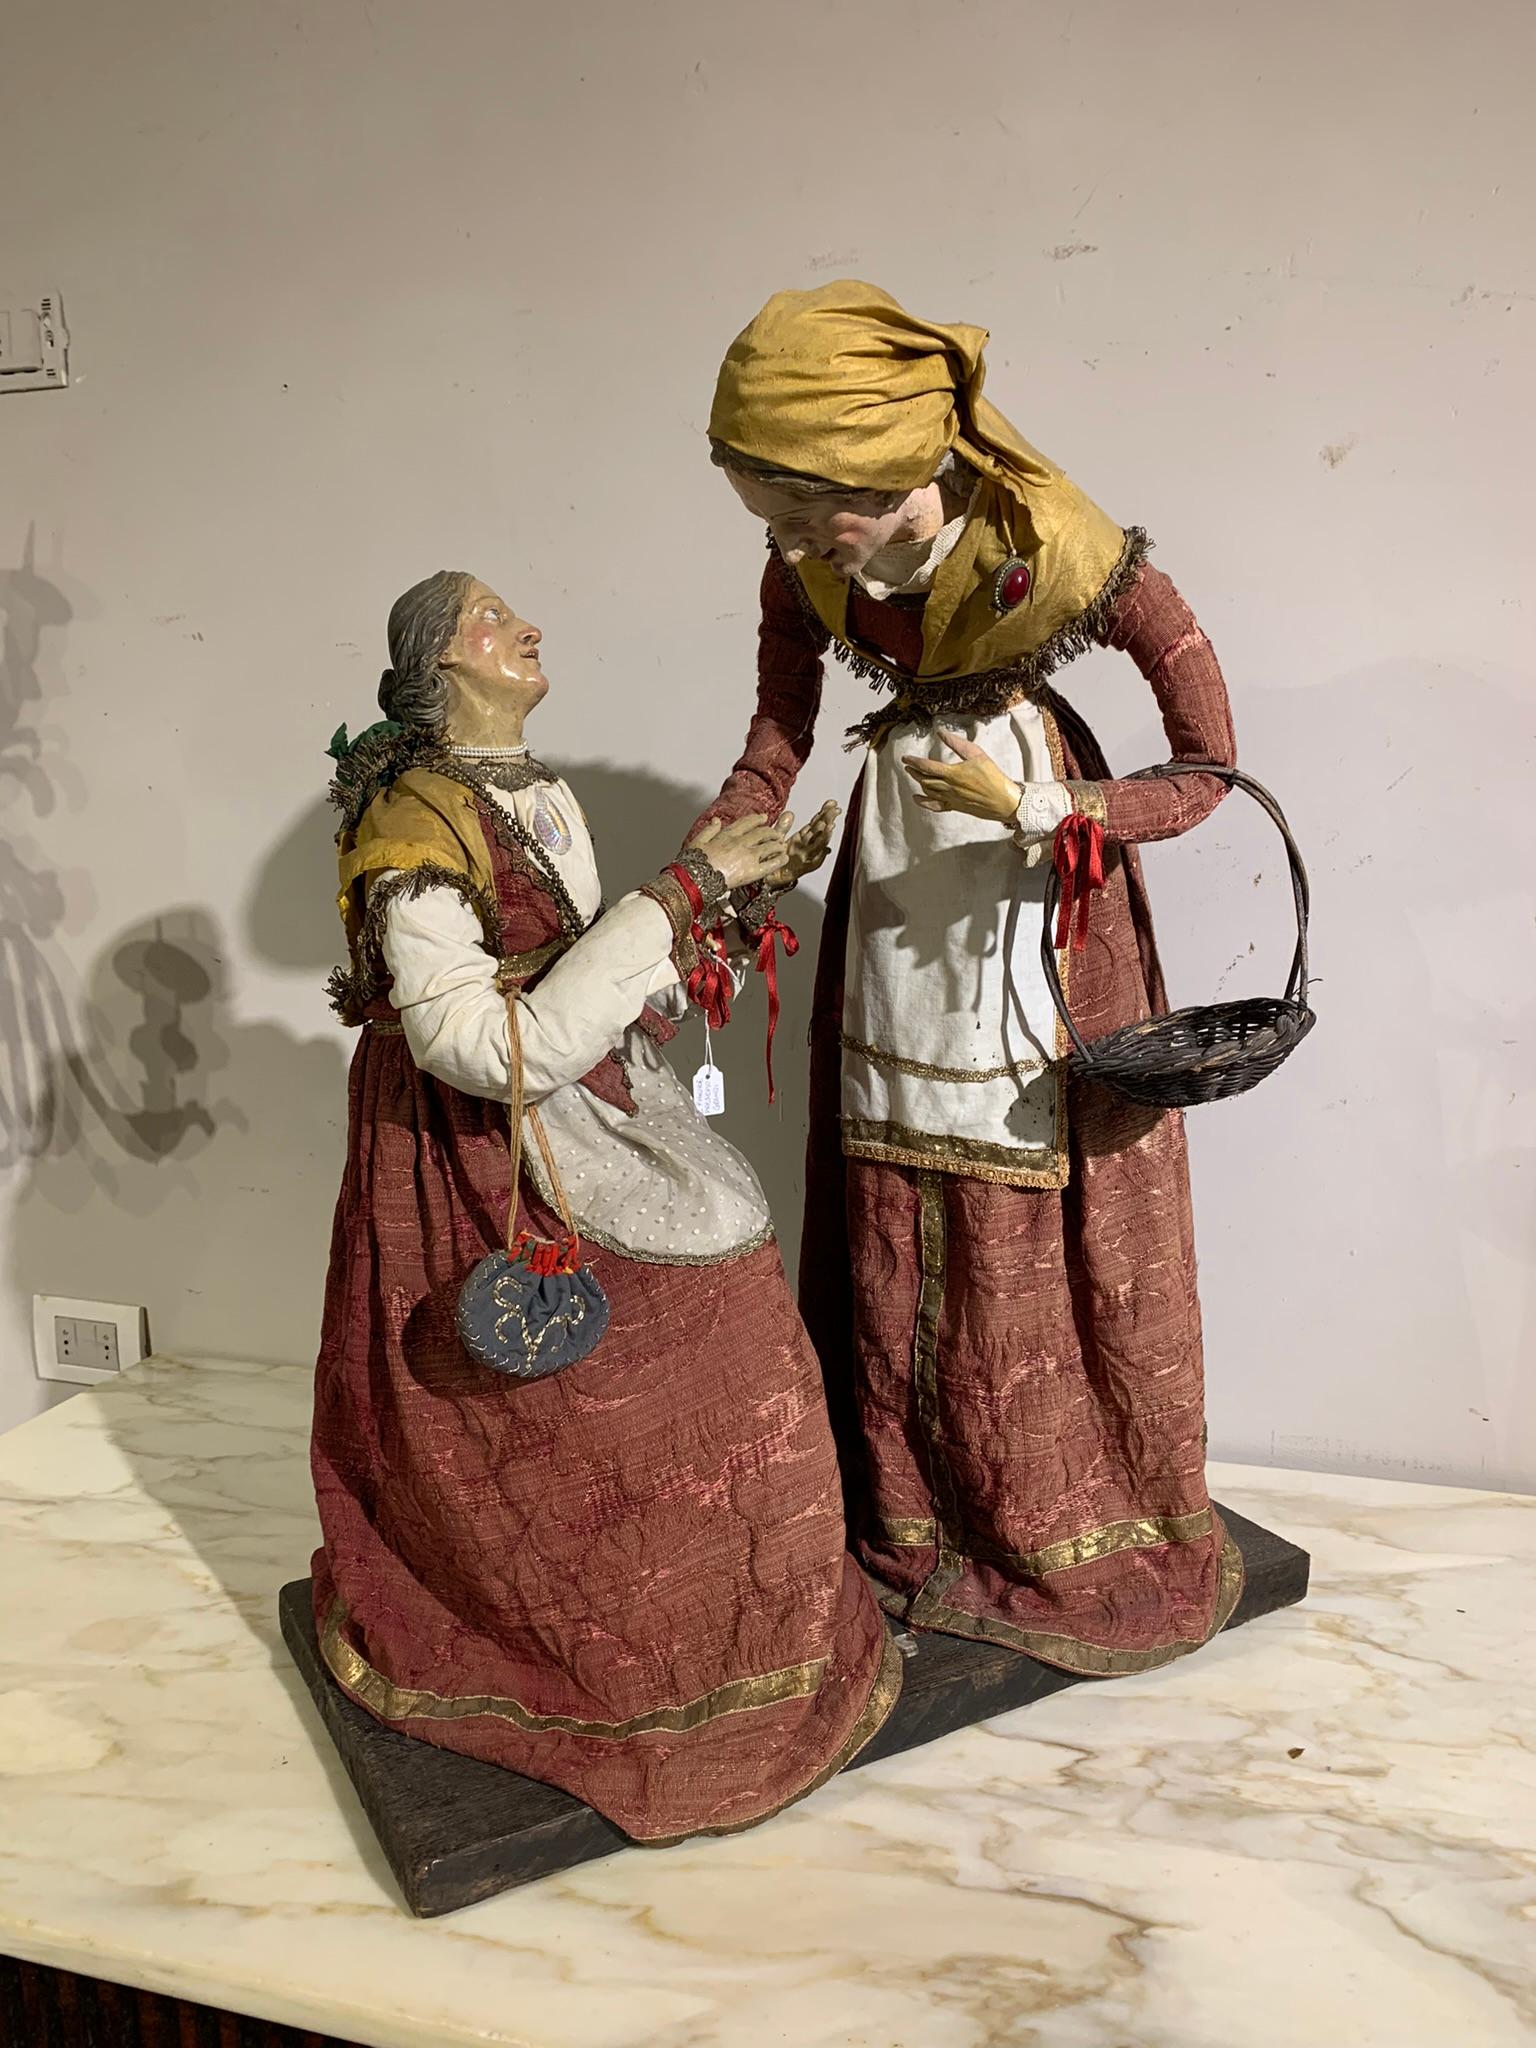 Beautiful pair of large church crib sculptures in wood and painted terracotta with glass eyes depicting a peasant girl helping a beggar woman, typical Neapolitan manufacture from the mid-18th century embellished with small collectible jewels.